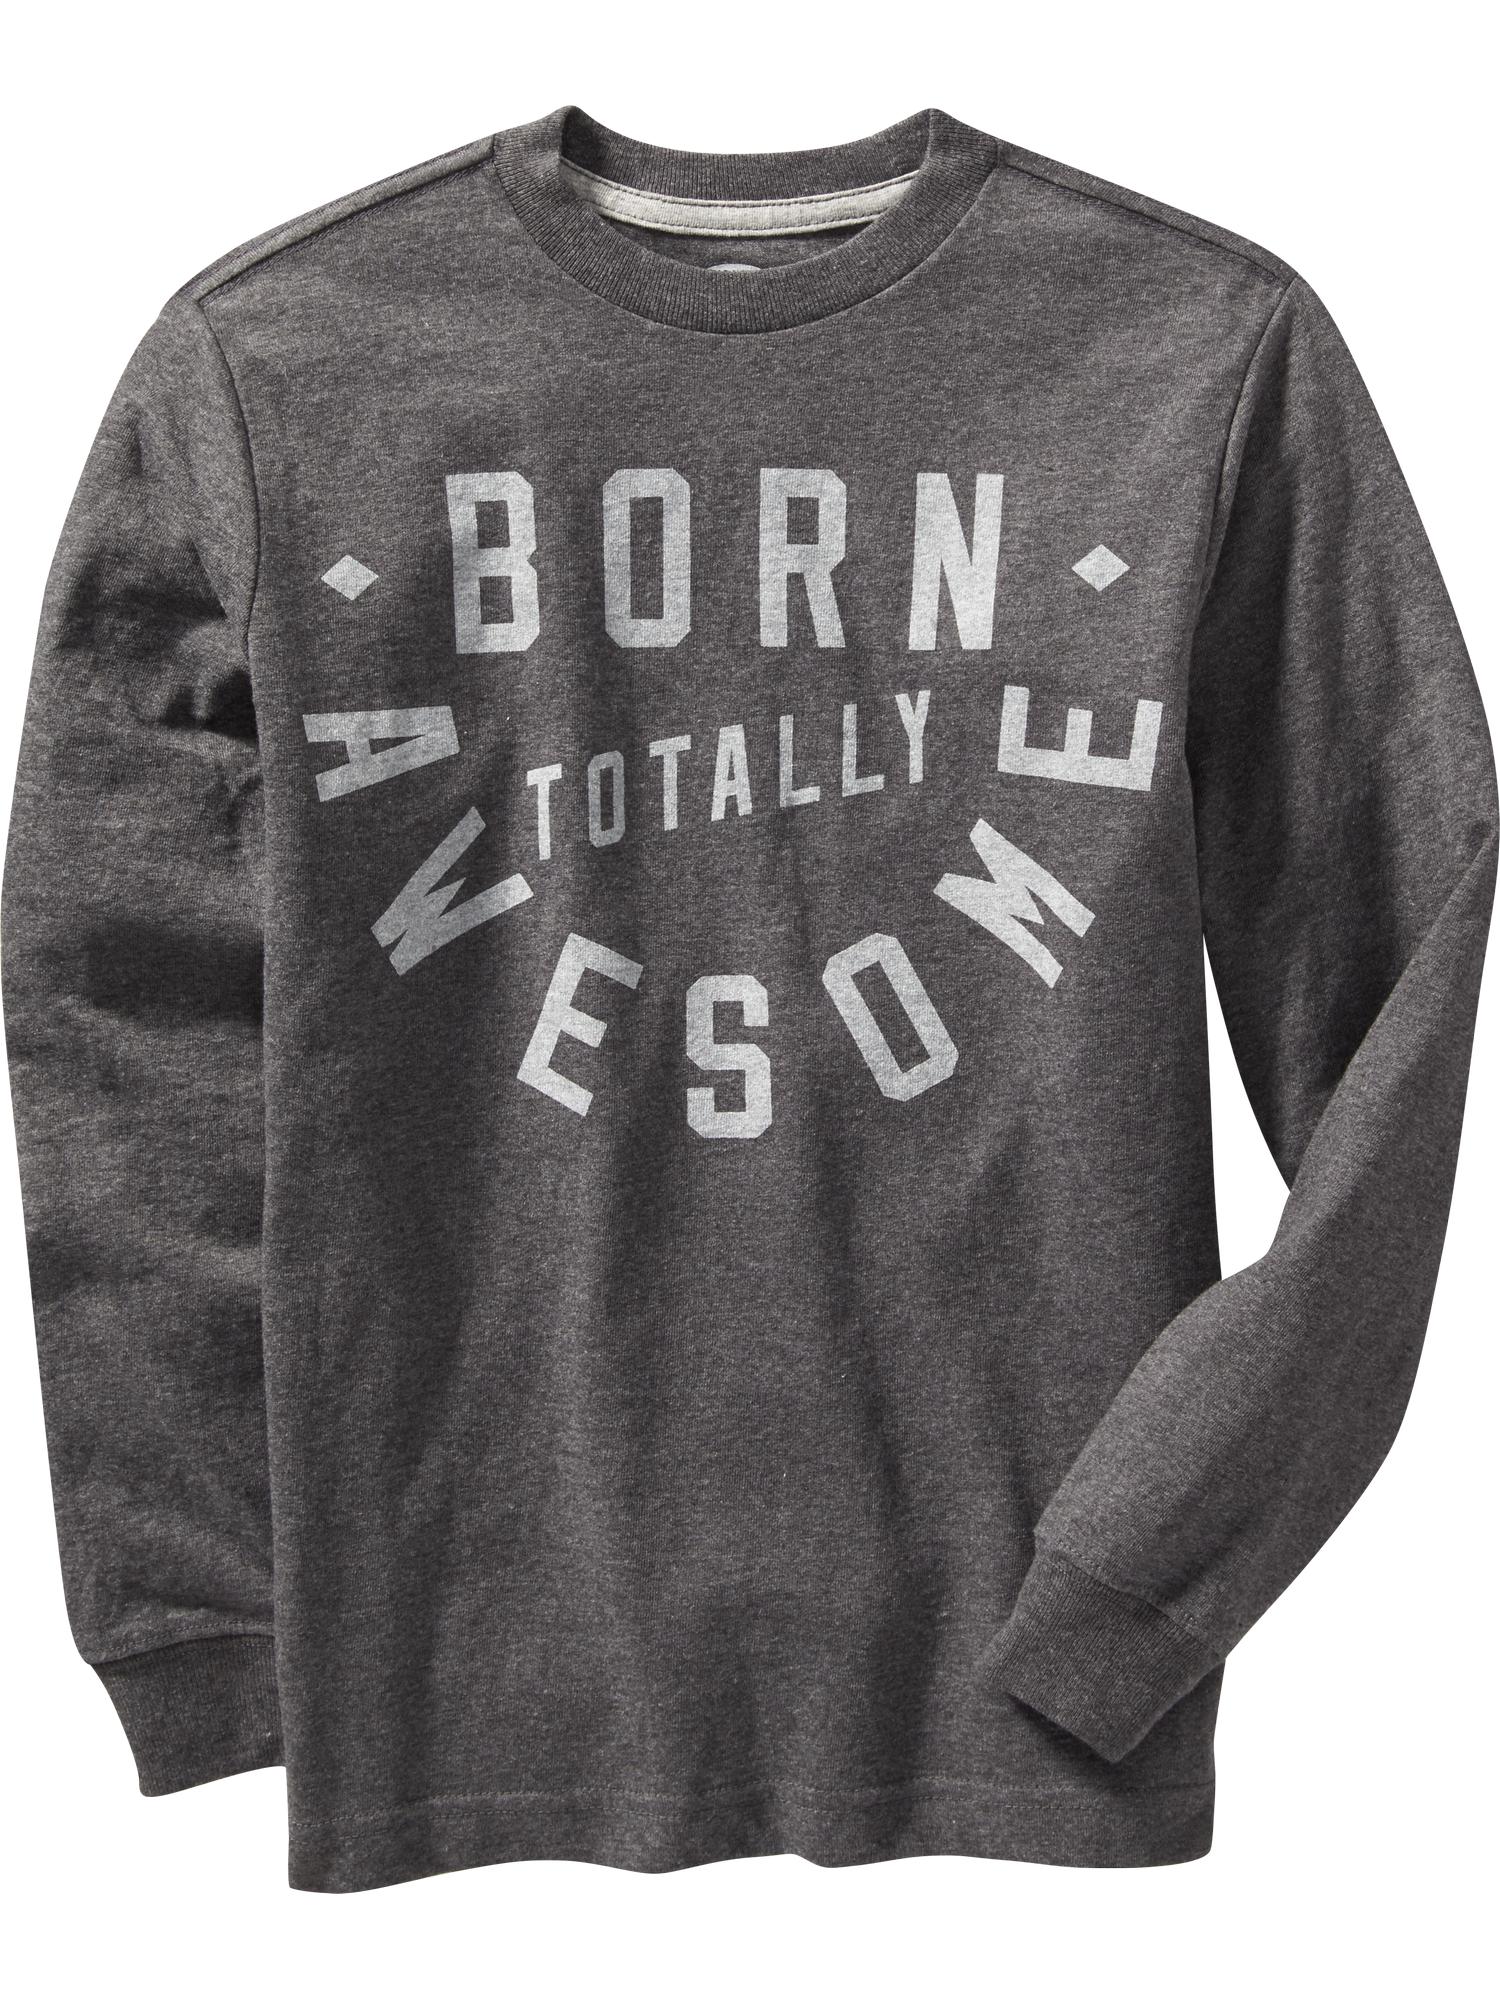 Boys Long-Sleeve Graphic Tee | Old Navy